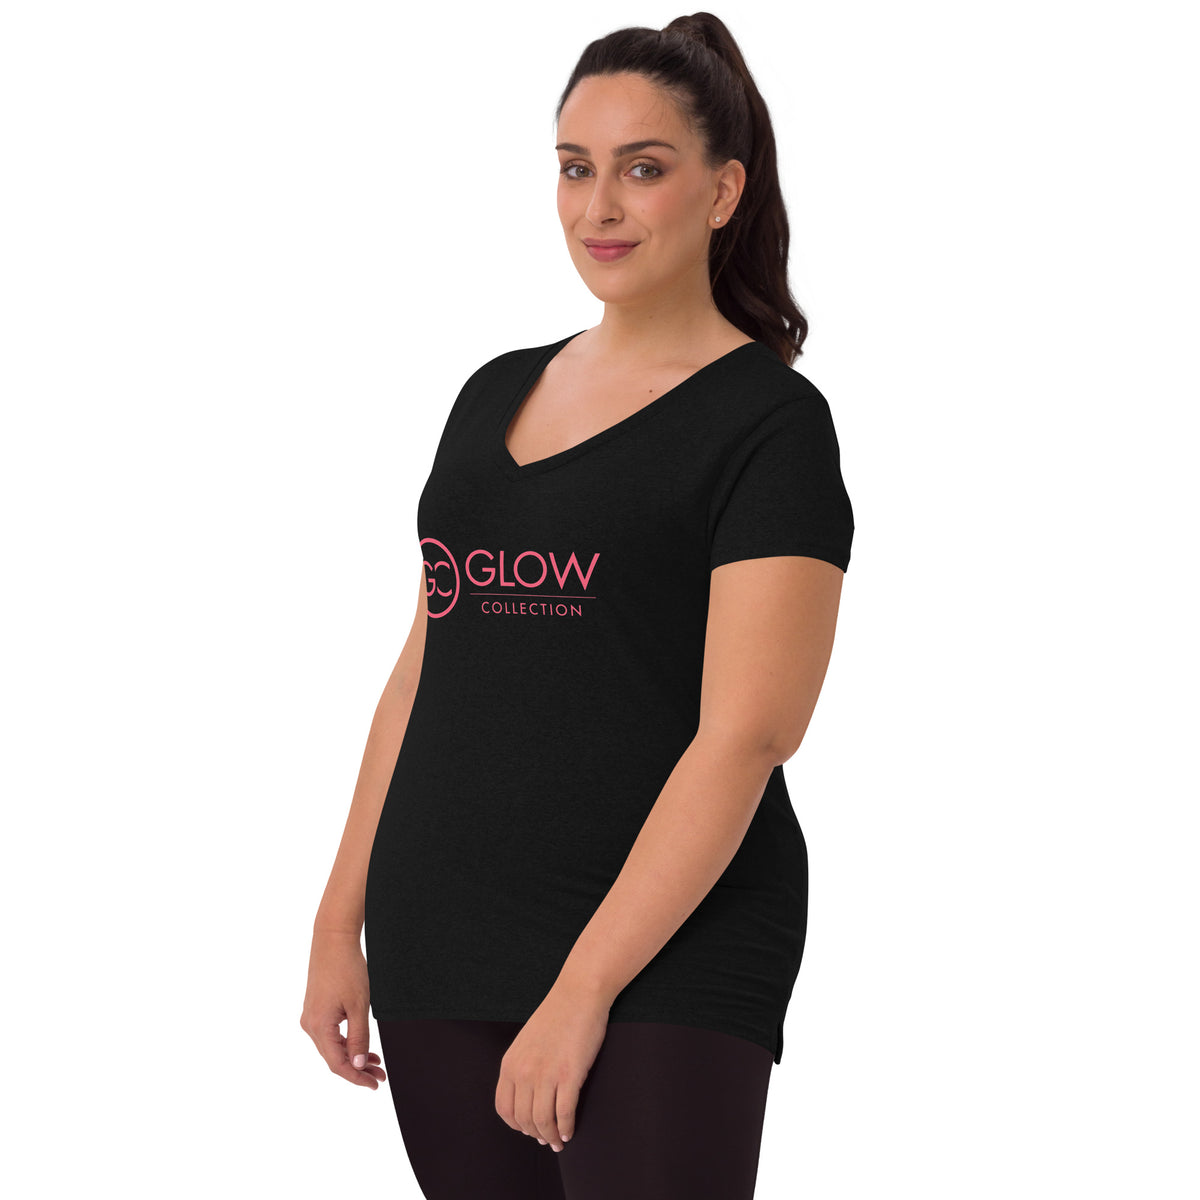 Glow Collection Women’s v-neck t-shirt